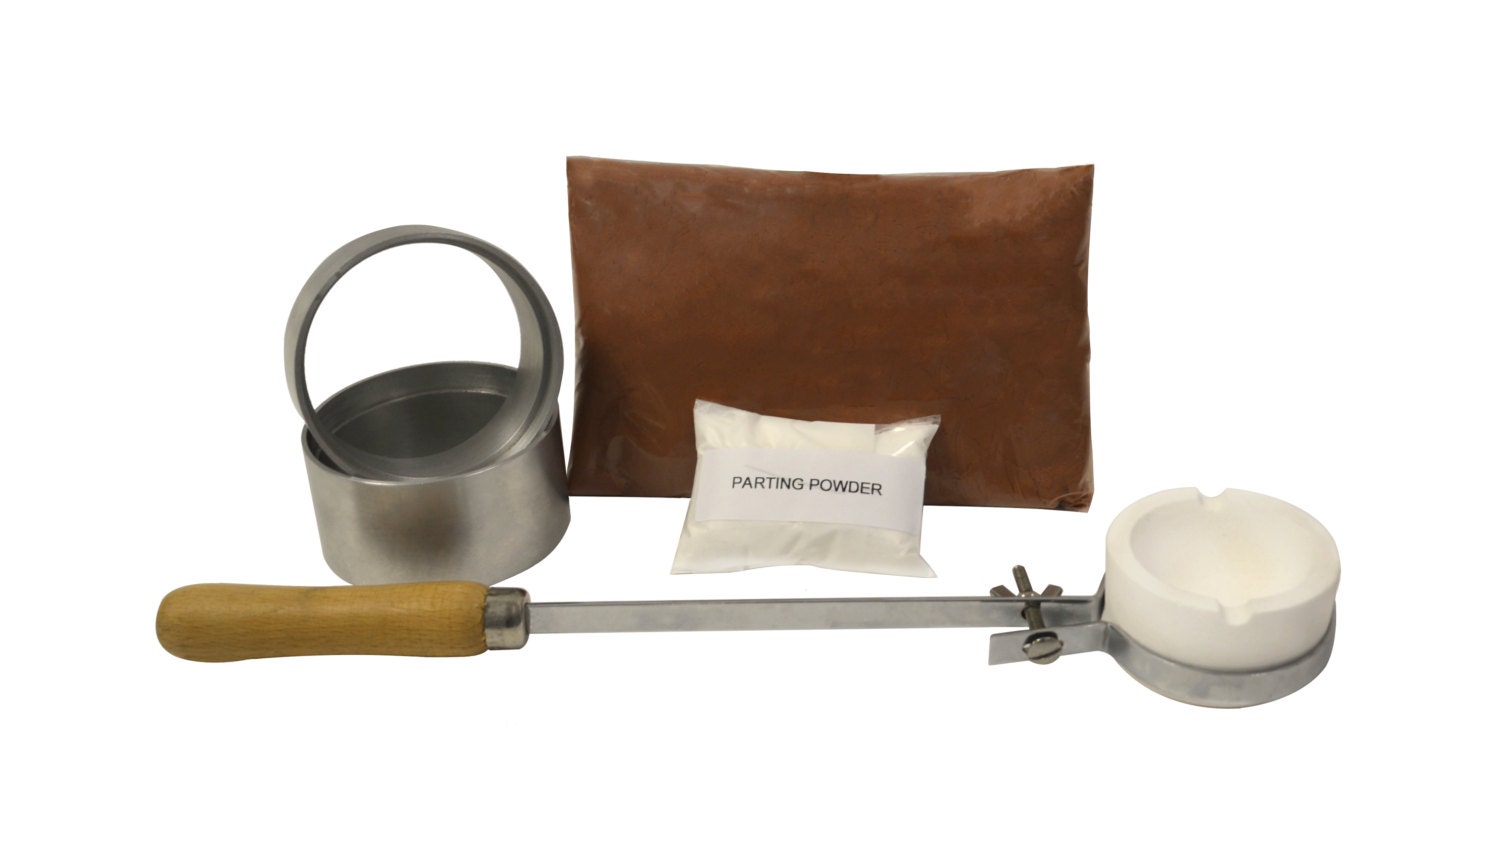 Sand Casting Set with 10 Lbs of Petrobond Sand Casting Clay, 100 MM Mold  Frame, Cast Iron Flask, & Heat-Resistant Gloves, KIT-0143